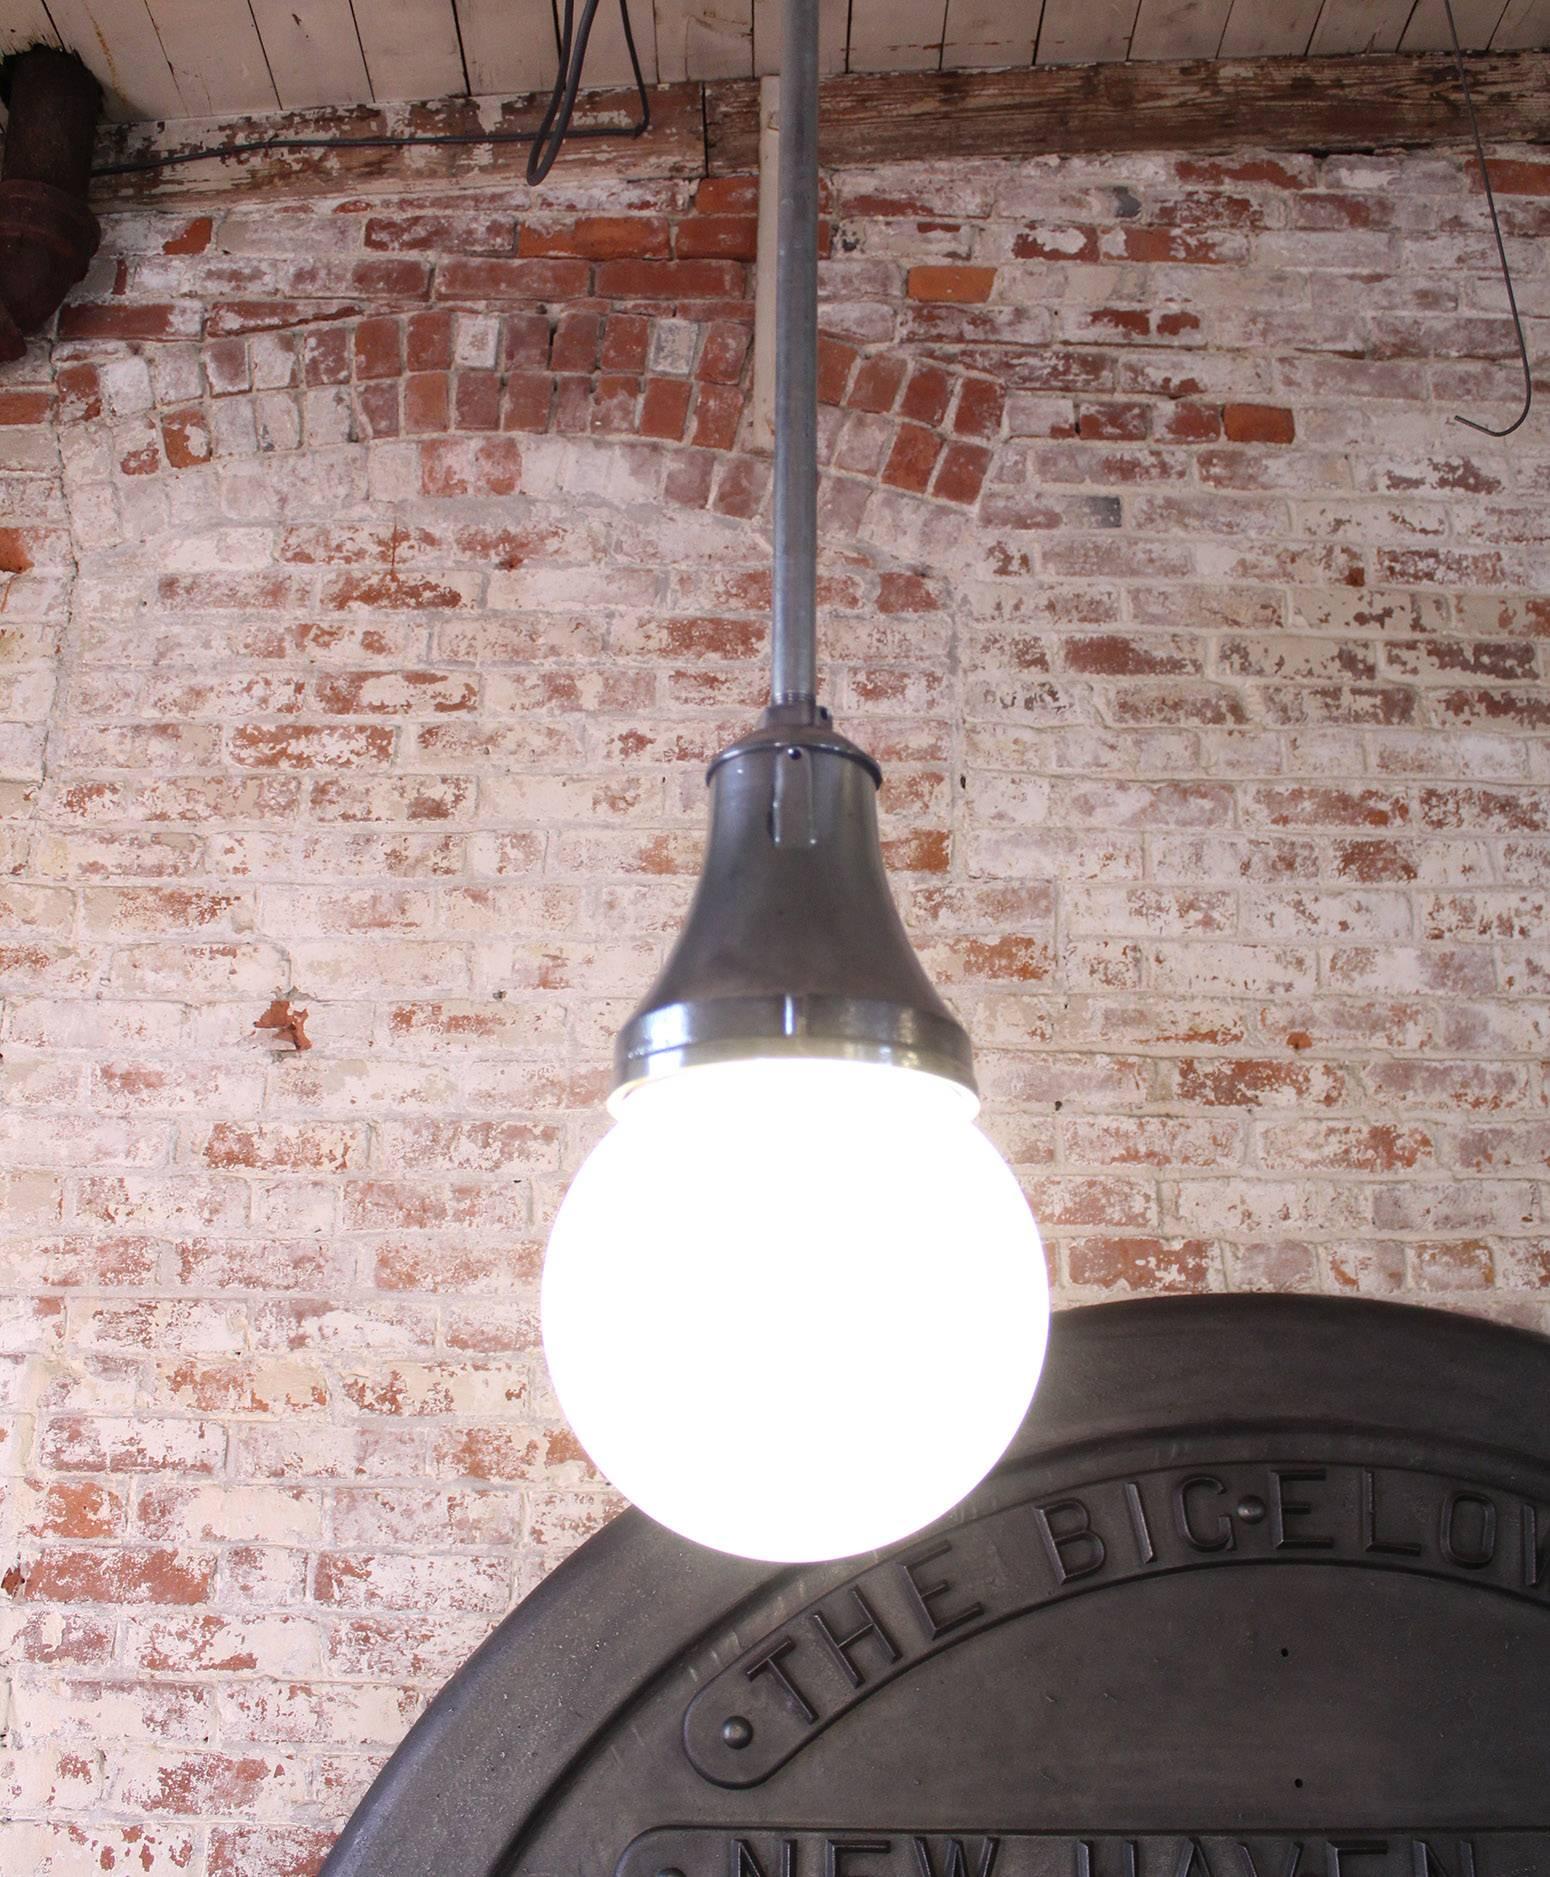 Cast iron, steel and frosted white glass globe industrial hanging, ceiling pendant lamp, light. The glass measures 8